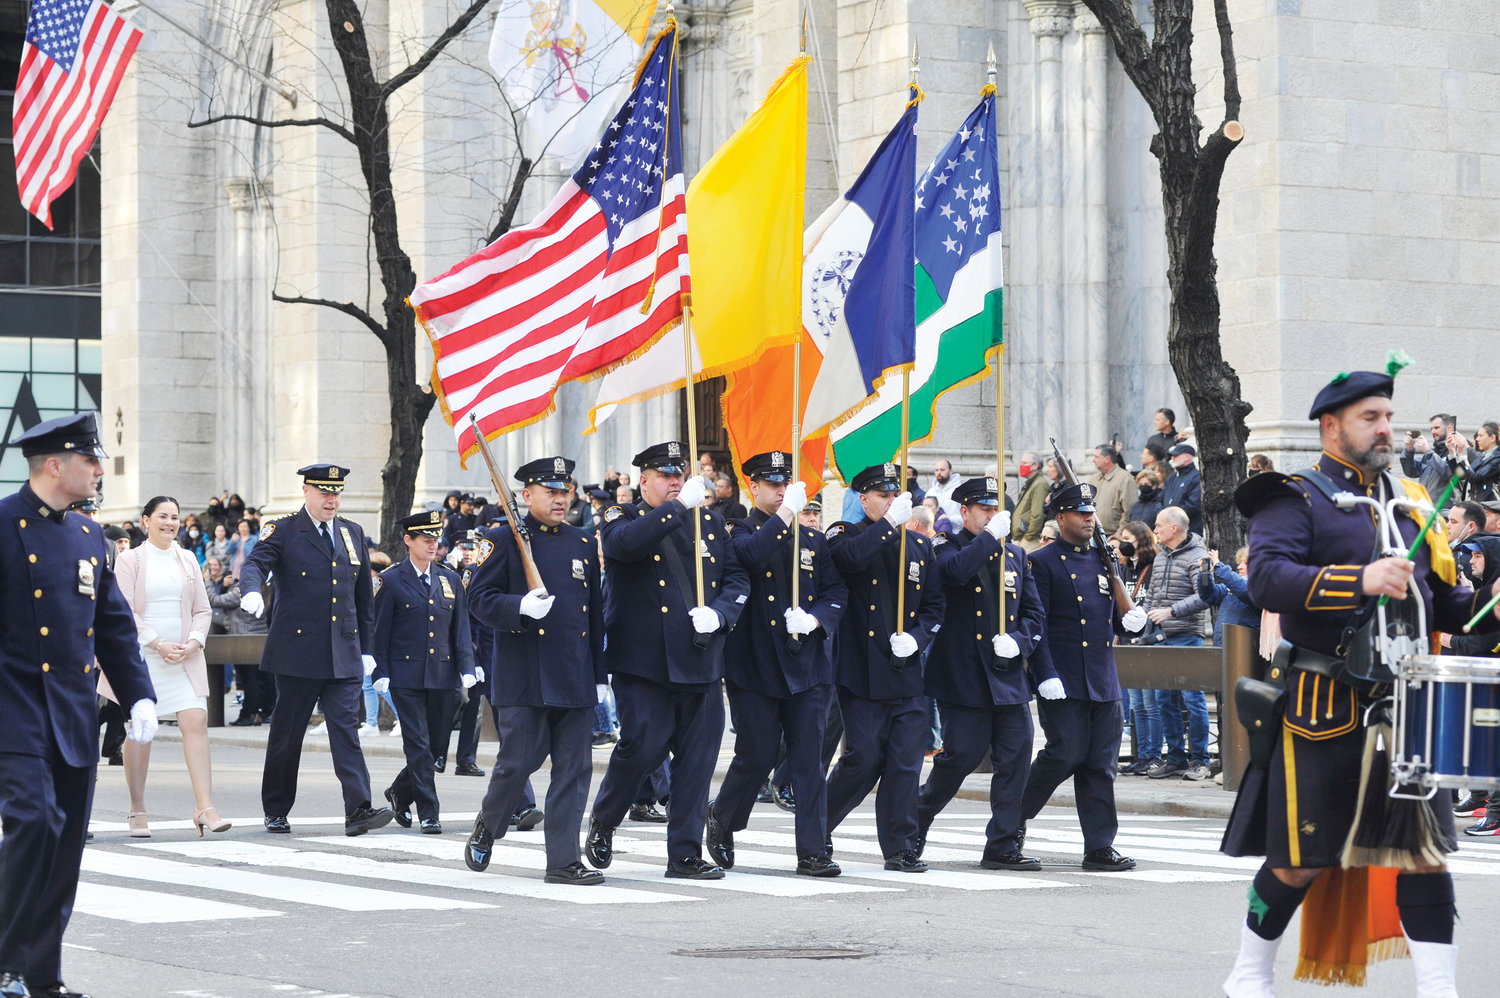 Flag bearers march along Fifth Avenue outside St. Patrick’s Cathedral where Cardinal Dolan celebrated the annual Mass for the NYPD Holy Name Society of Manhattan, Bronx and Staten Island March 27.